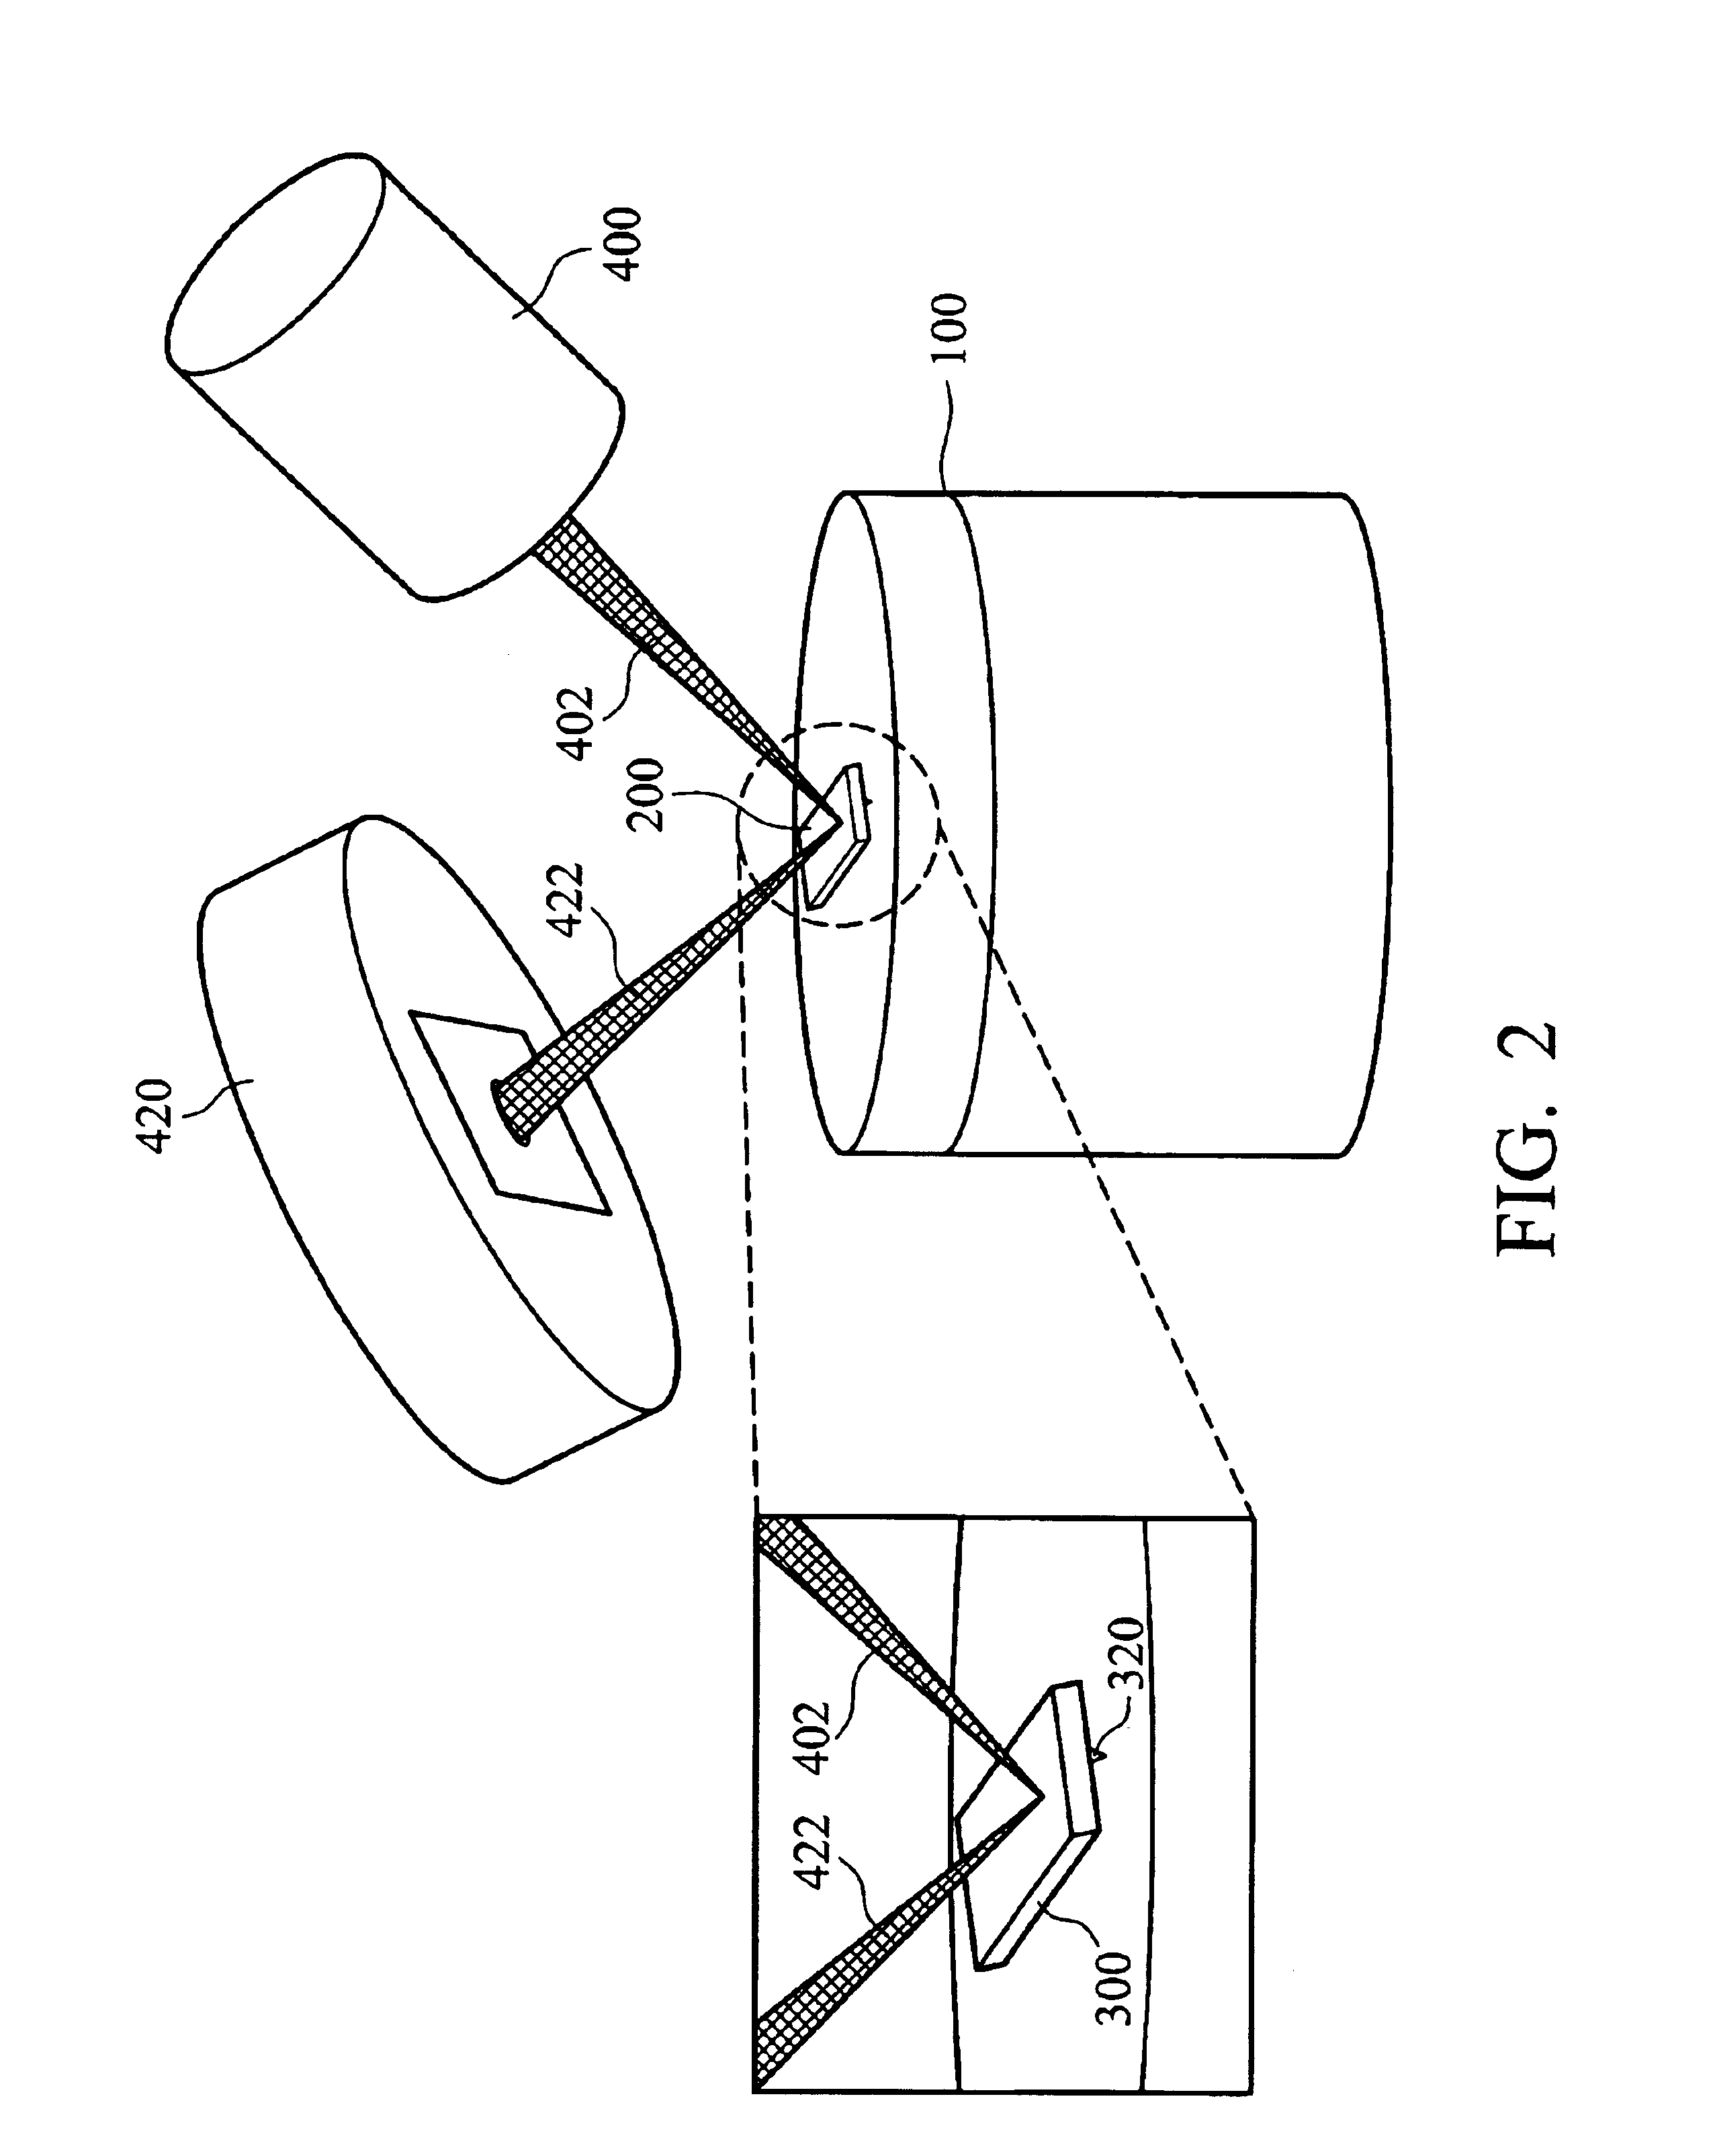 Electrical scanning probe microscope apparatus